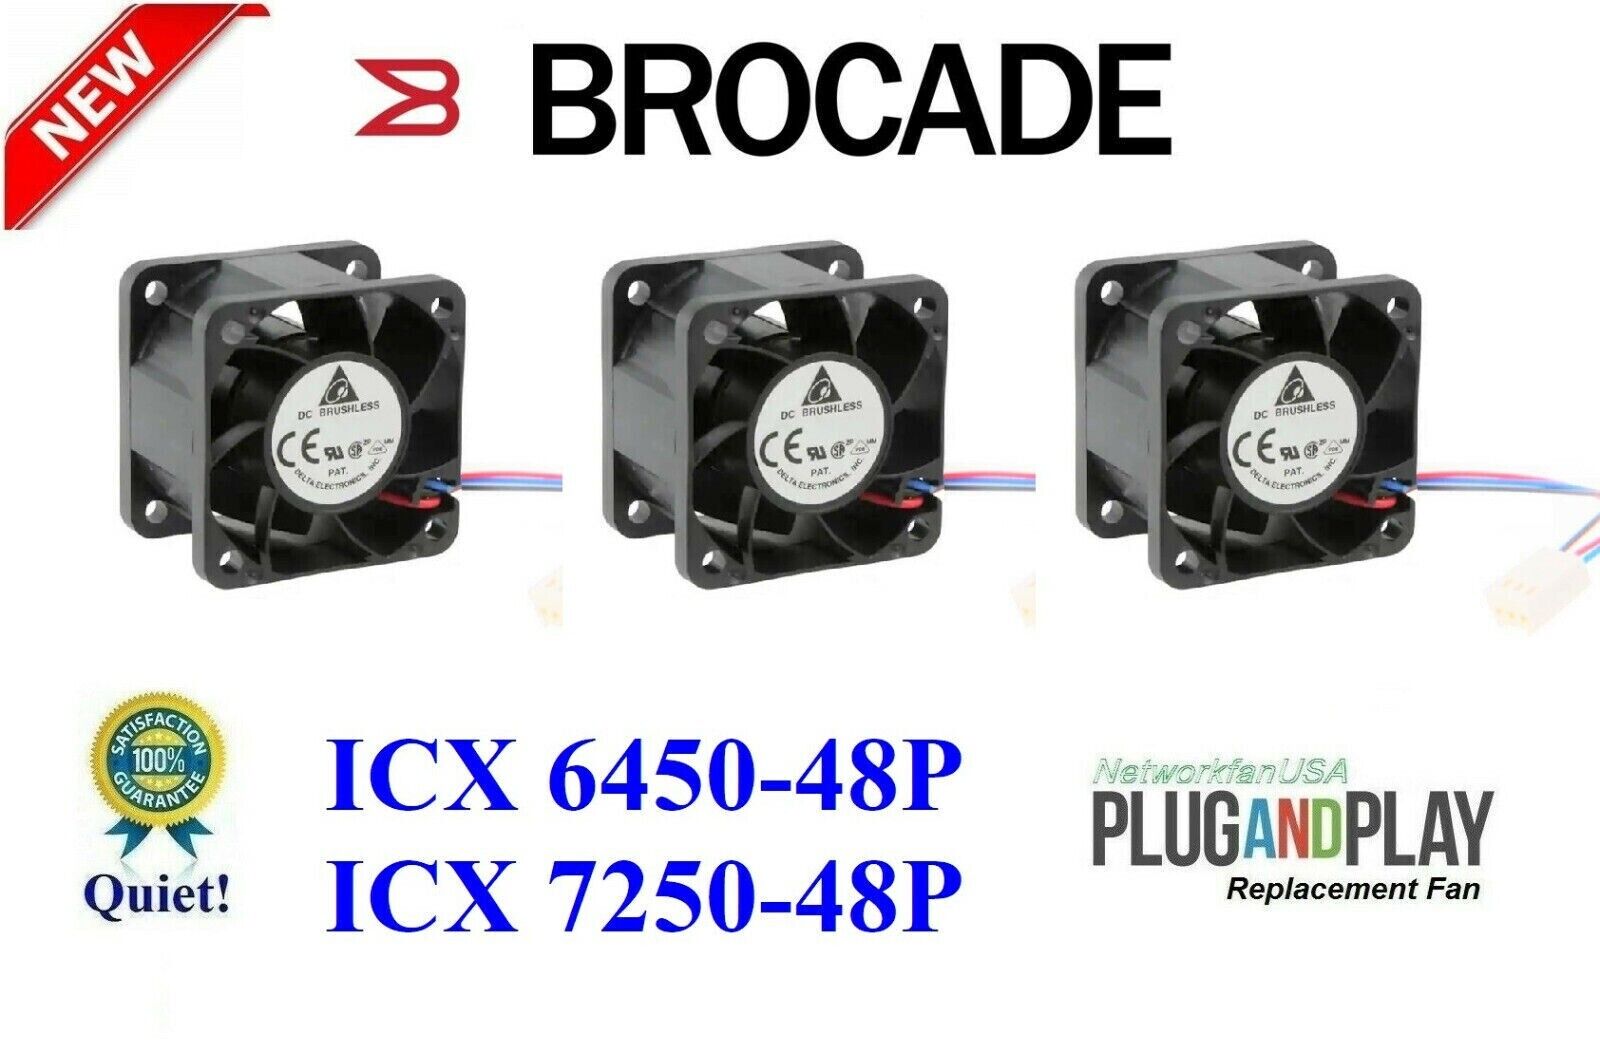 3X Quiet Replacement Fans for Brocade ICX 6450-48P / ICX7250-48P